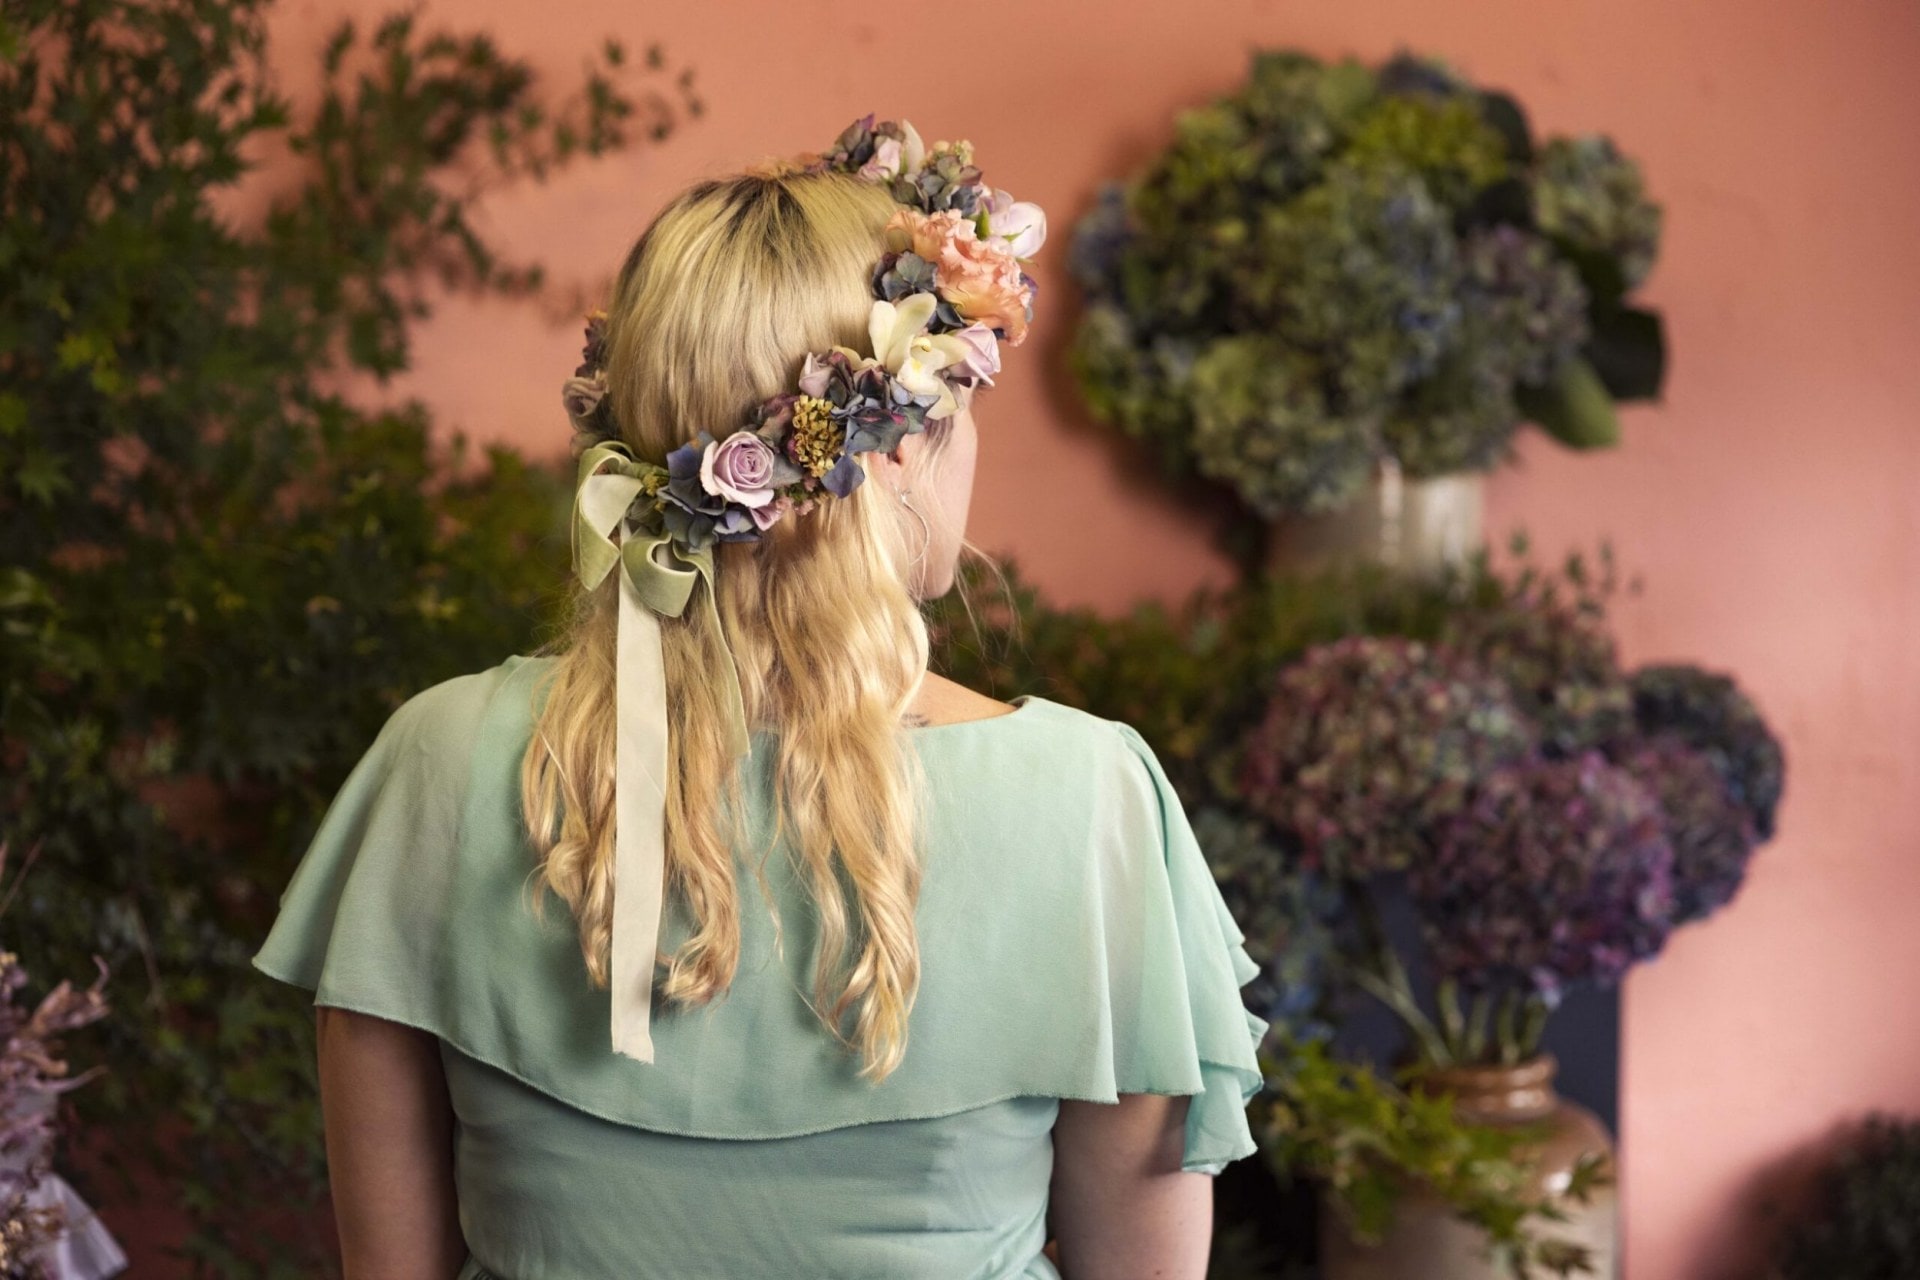 Georgie Malyon with her back to the camera wearing flower crown